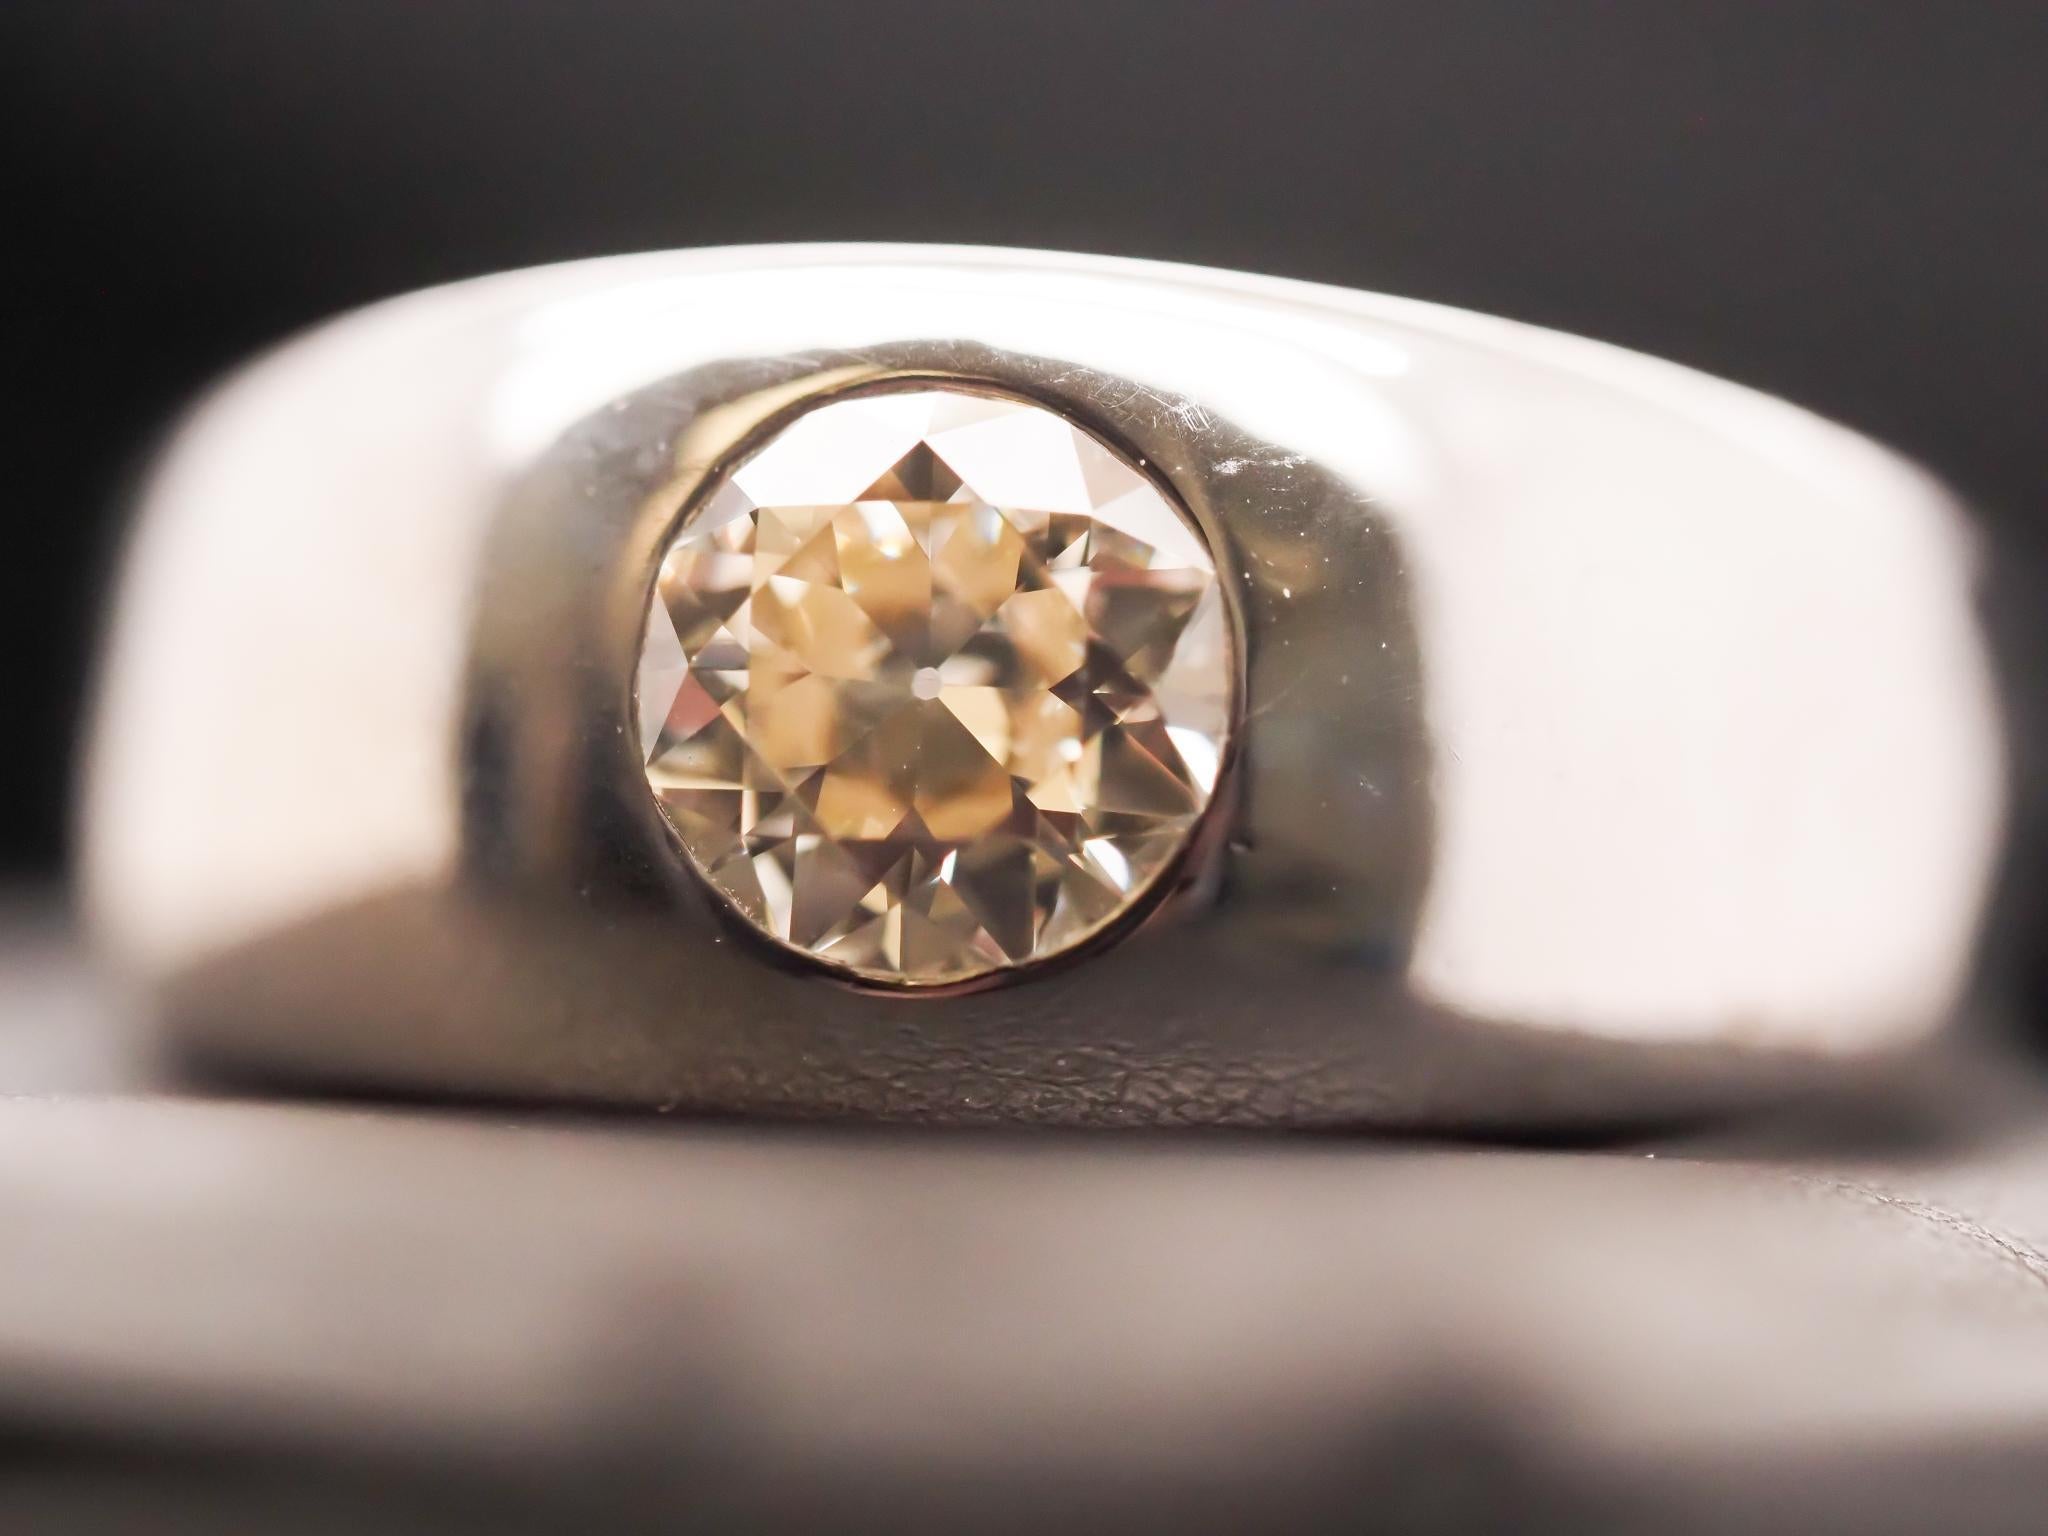 Year: 1940s
Item Details:
Ring Size: 11 (Sizable)
Metal Type: 14K White Gold [Hallmarked, and Tested]
Weight: 12.5grams
Diamond Details: 1.35ct, Old European Brilliant, Light Yellow (S/T Color), VS1 Clarity
Band Width: 4.68mm
Condition: